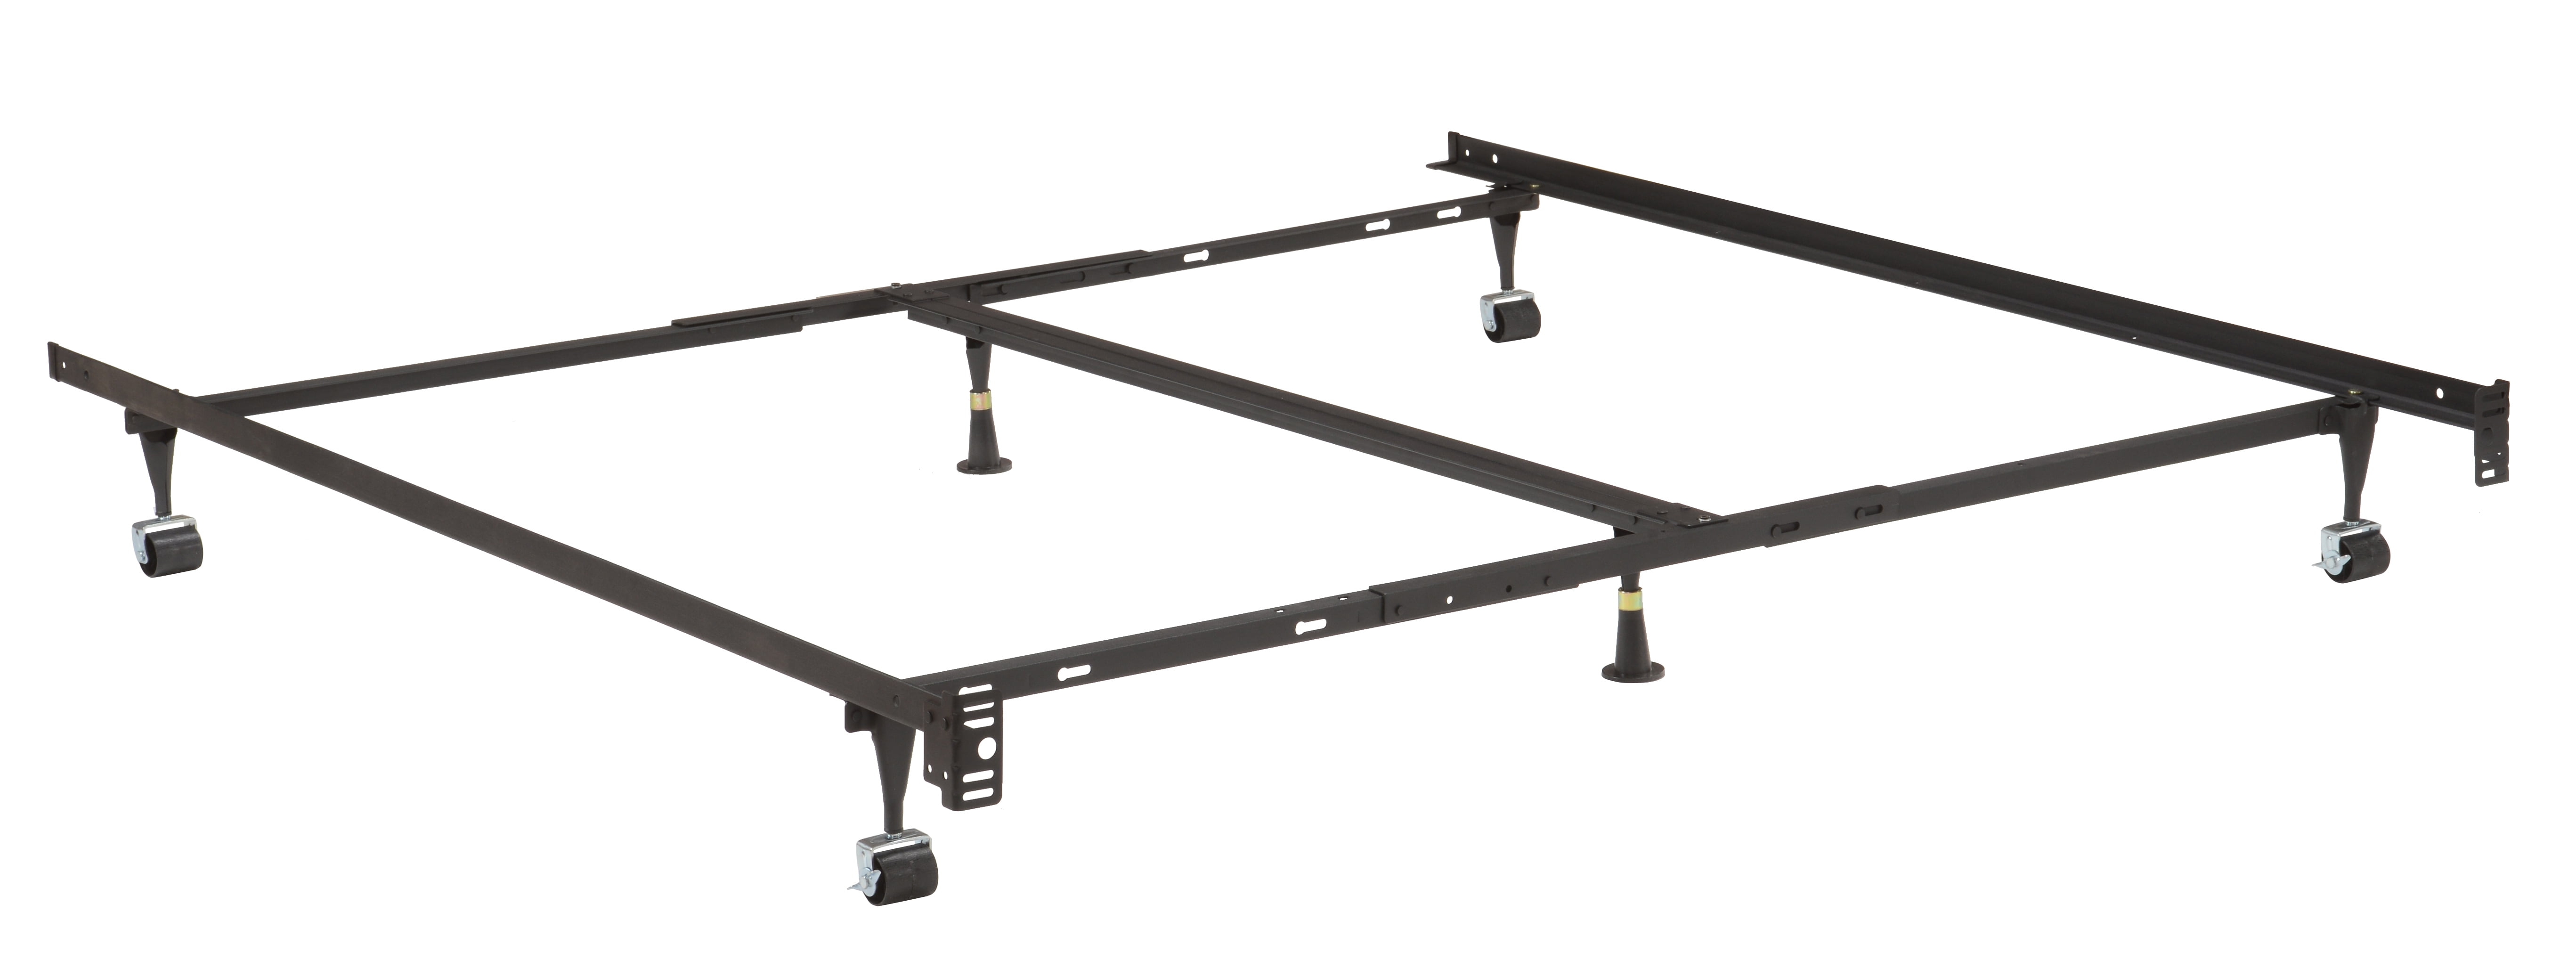 Anit Adjustable Metal Bed Frame With, Does Bed Frame Need Center Support